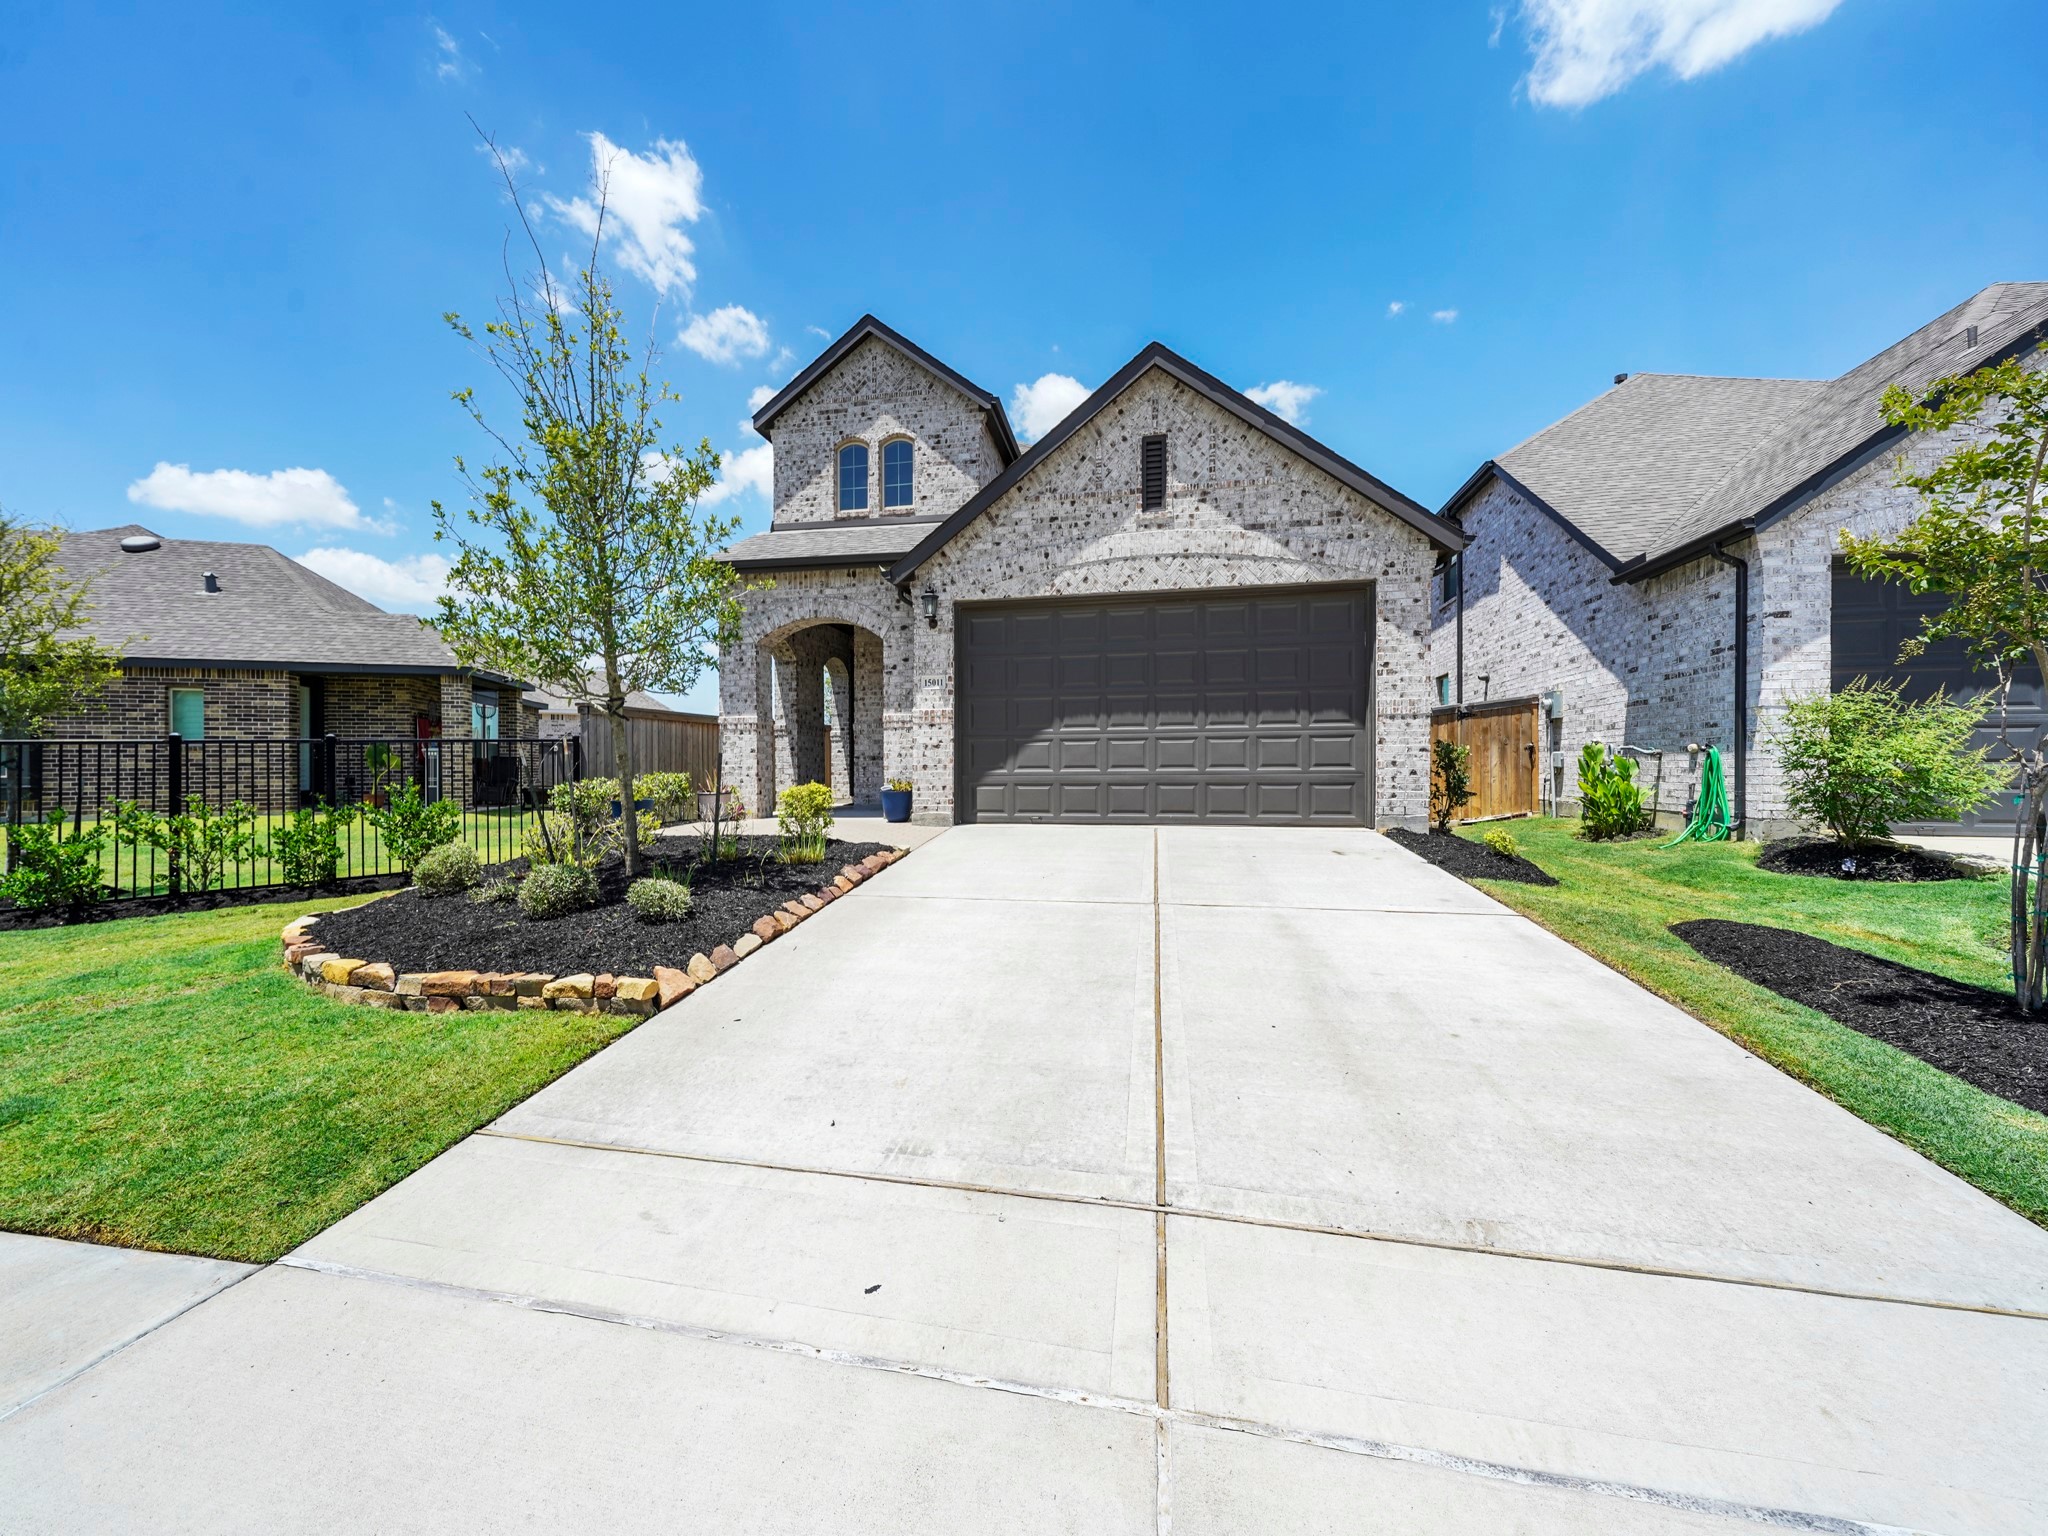 Welcome home! Immaculate 2 story home boasts over 2200 Sq Ft, 4 bedrooms, and 3 full bathrooms!